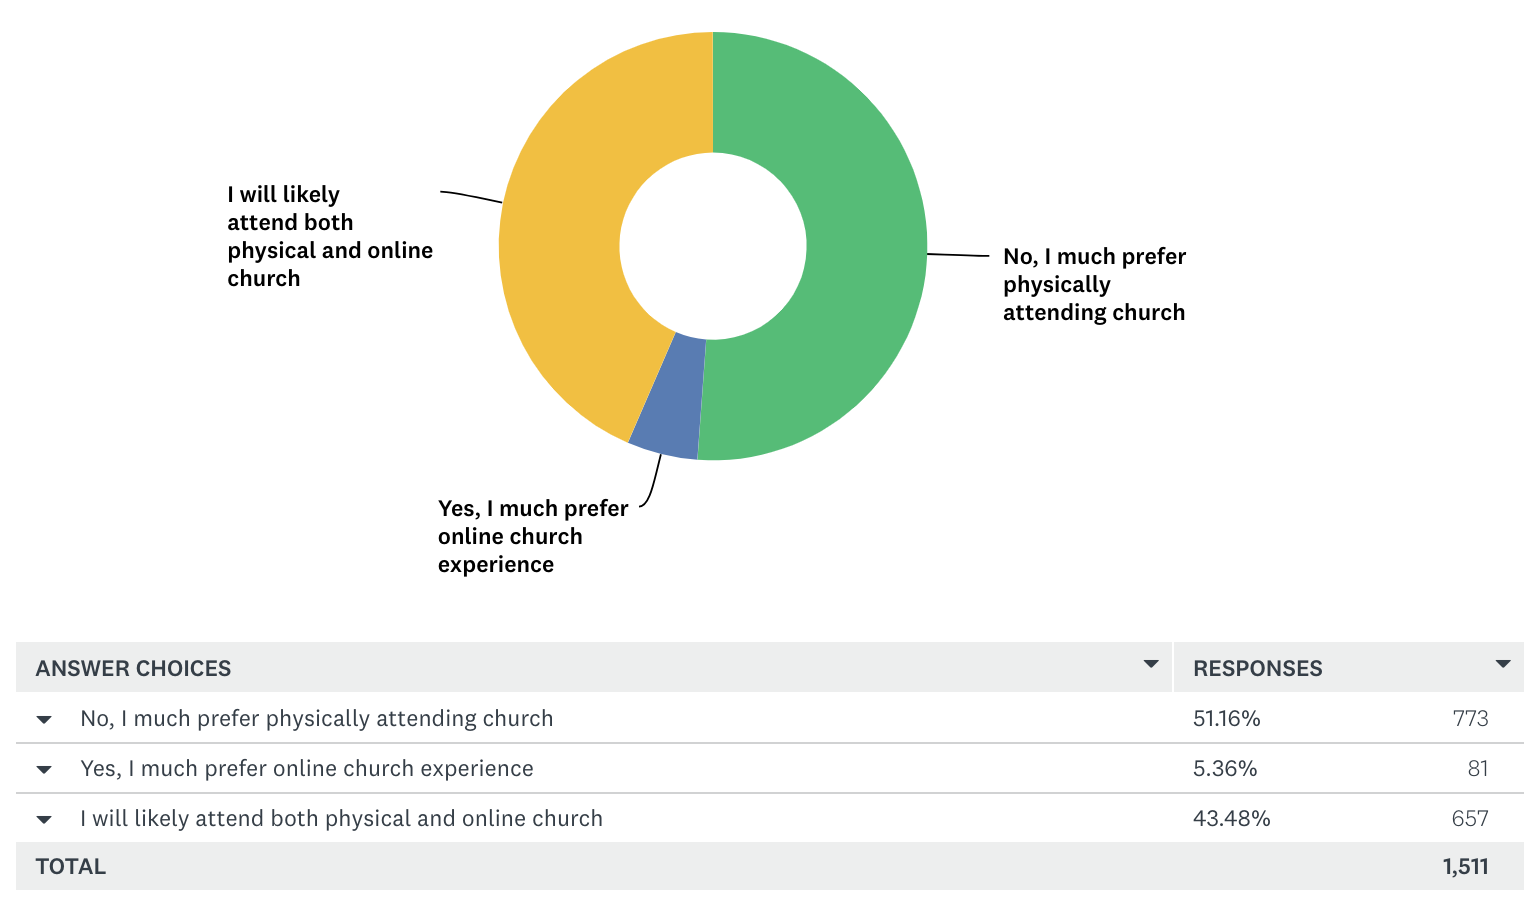 If/when things return to a state of normalcy, are you likely to attend online church services?